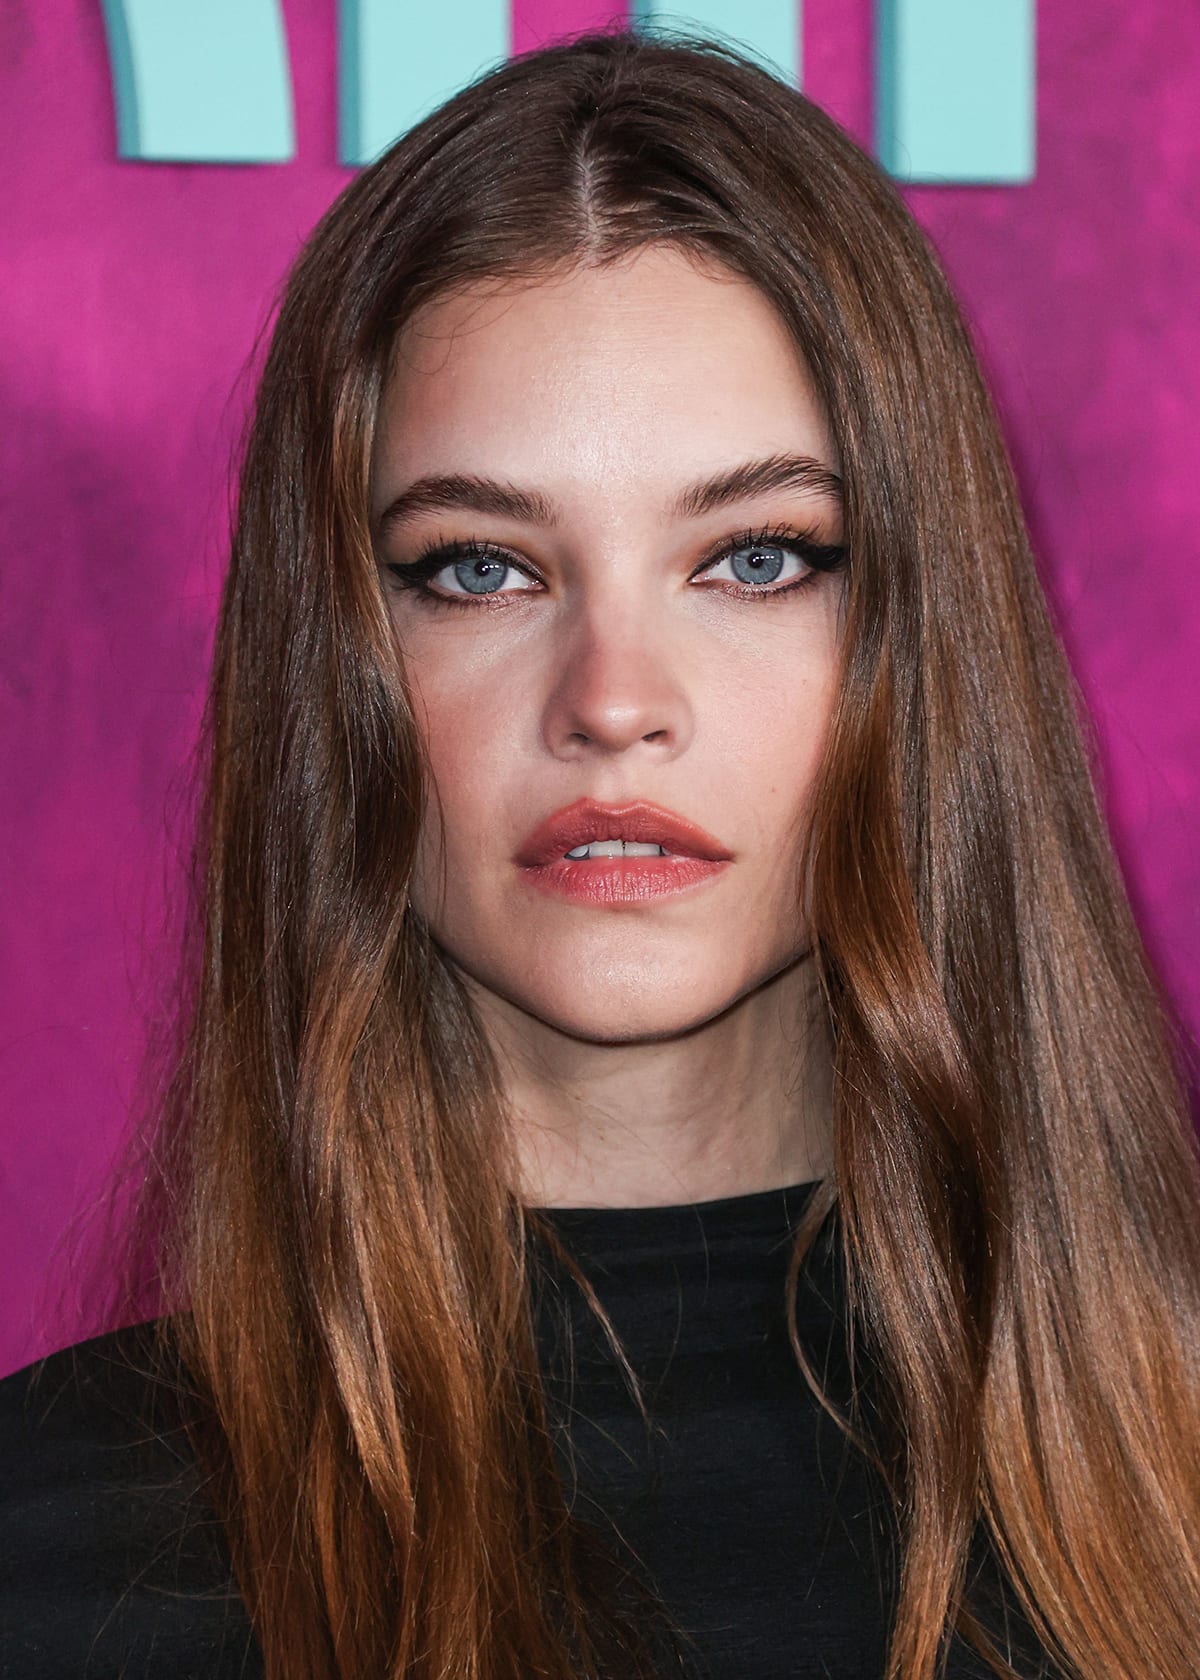 Barbara Palvin wears her long hair down and completes her gothic look with winged eyeliner, mascara, and peach lipstick